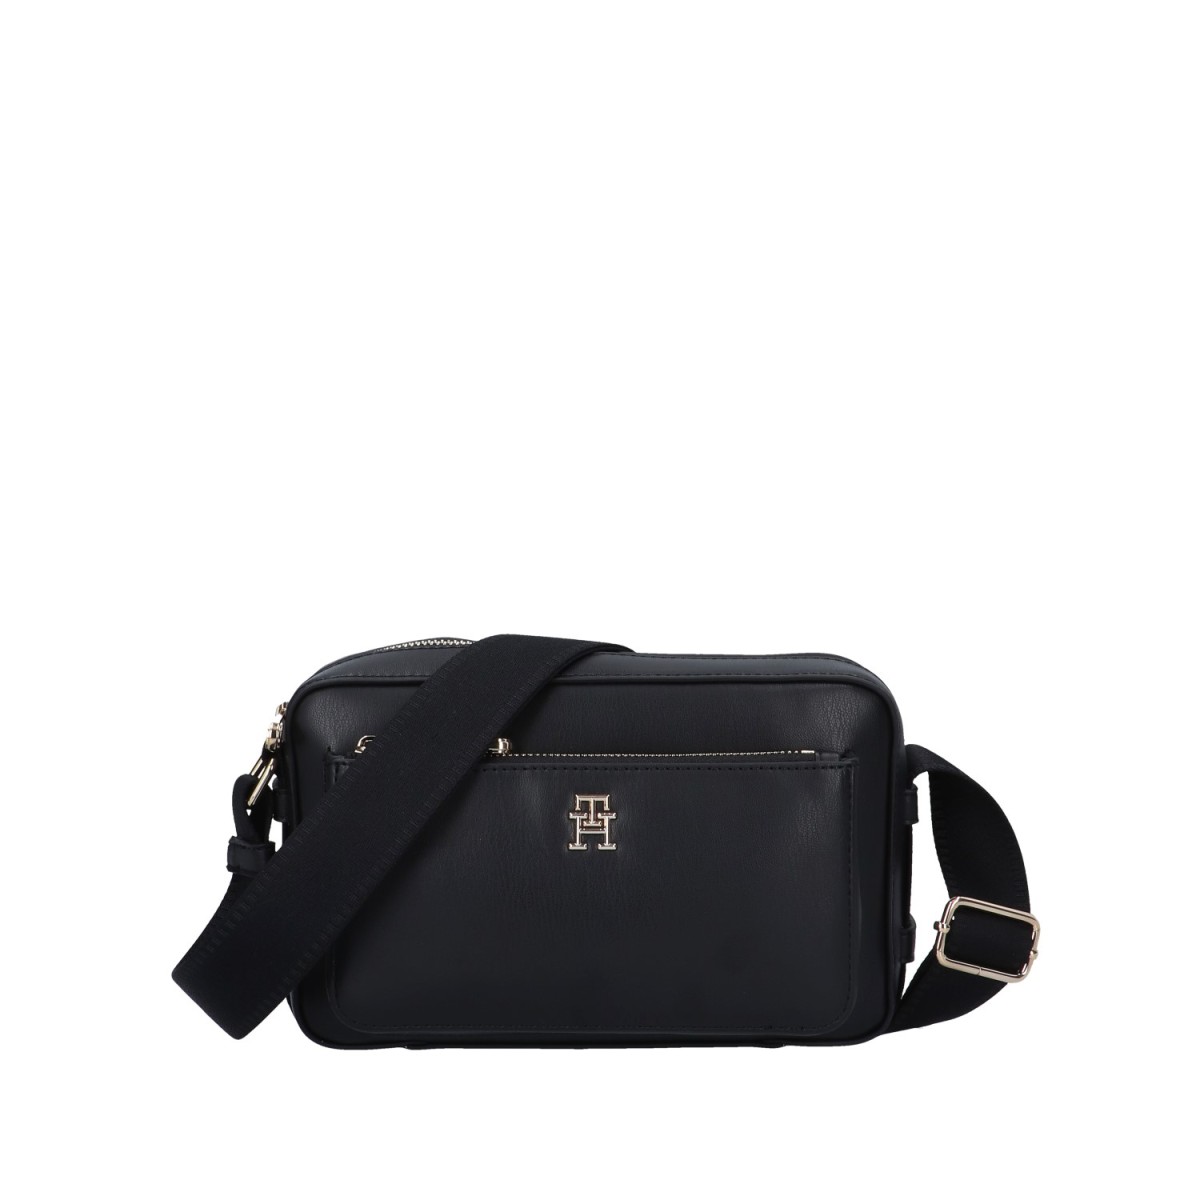 Tommy hilfiger Tracolla Nero AW0AW15991